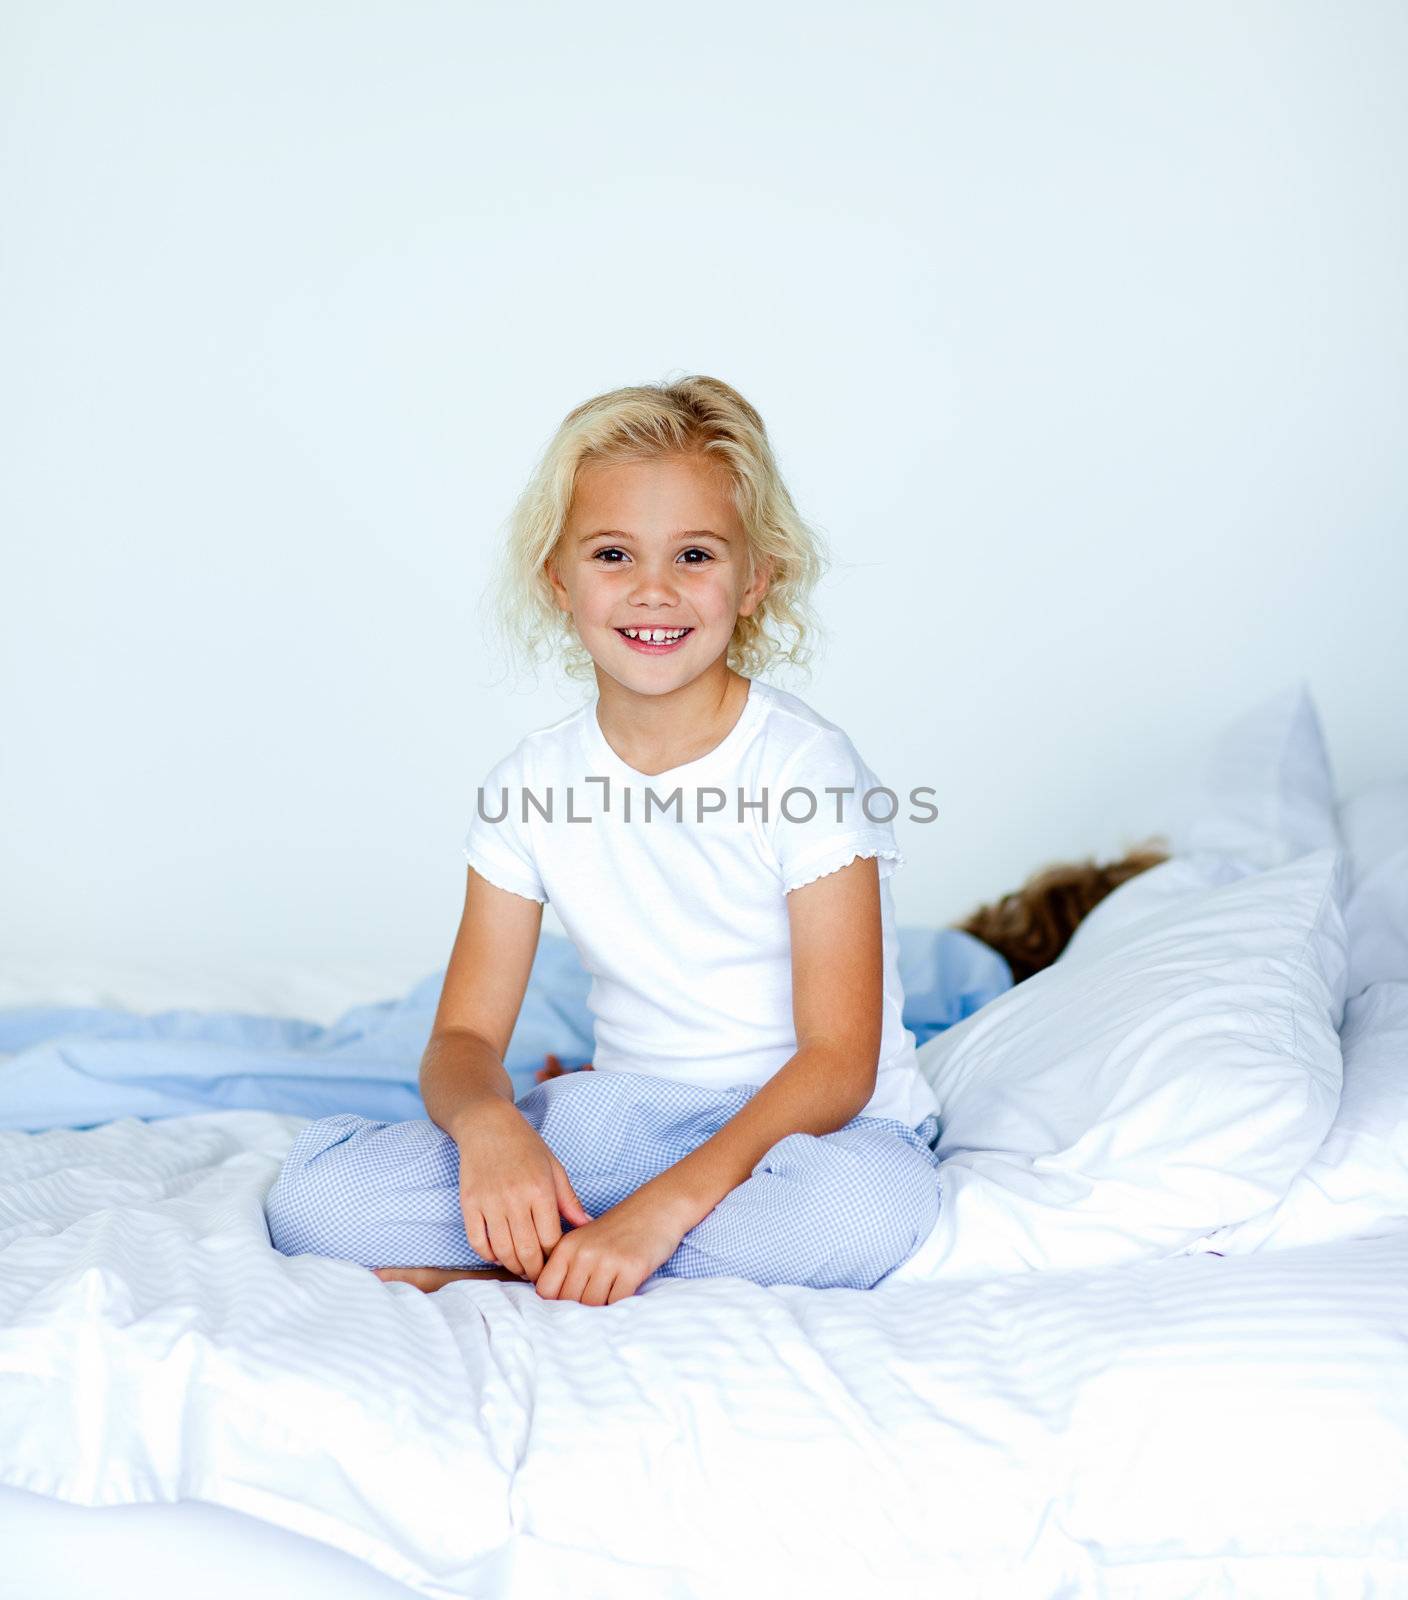 Smiling blonde girl sitting on a bed by Wavebreakmedia